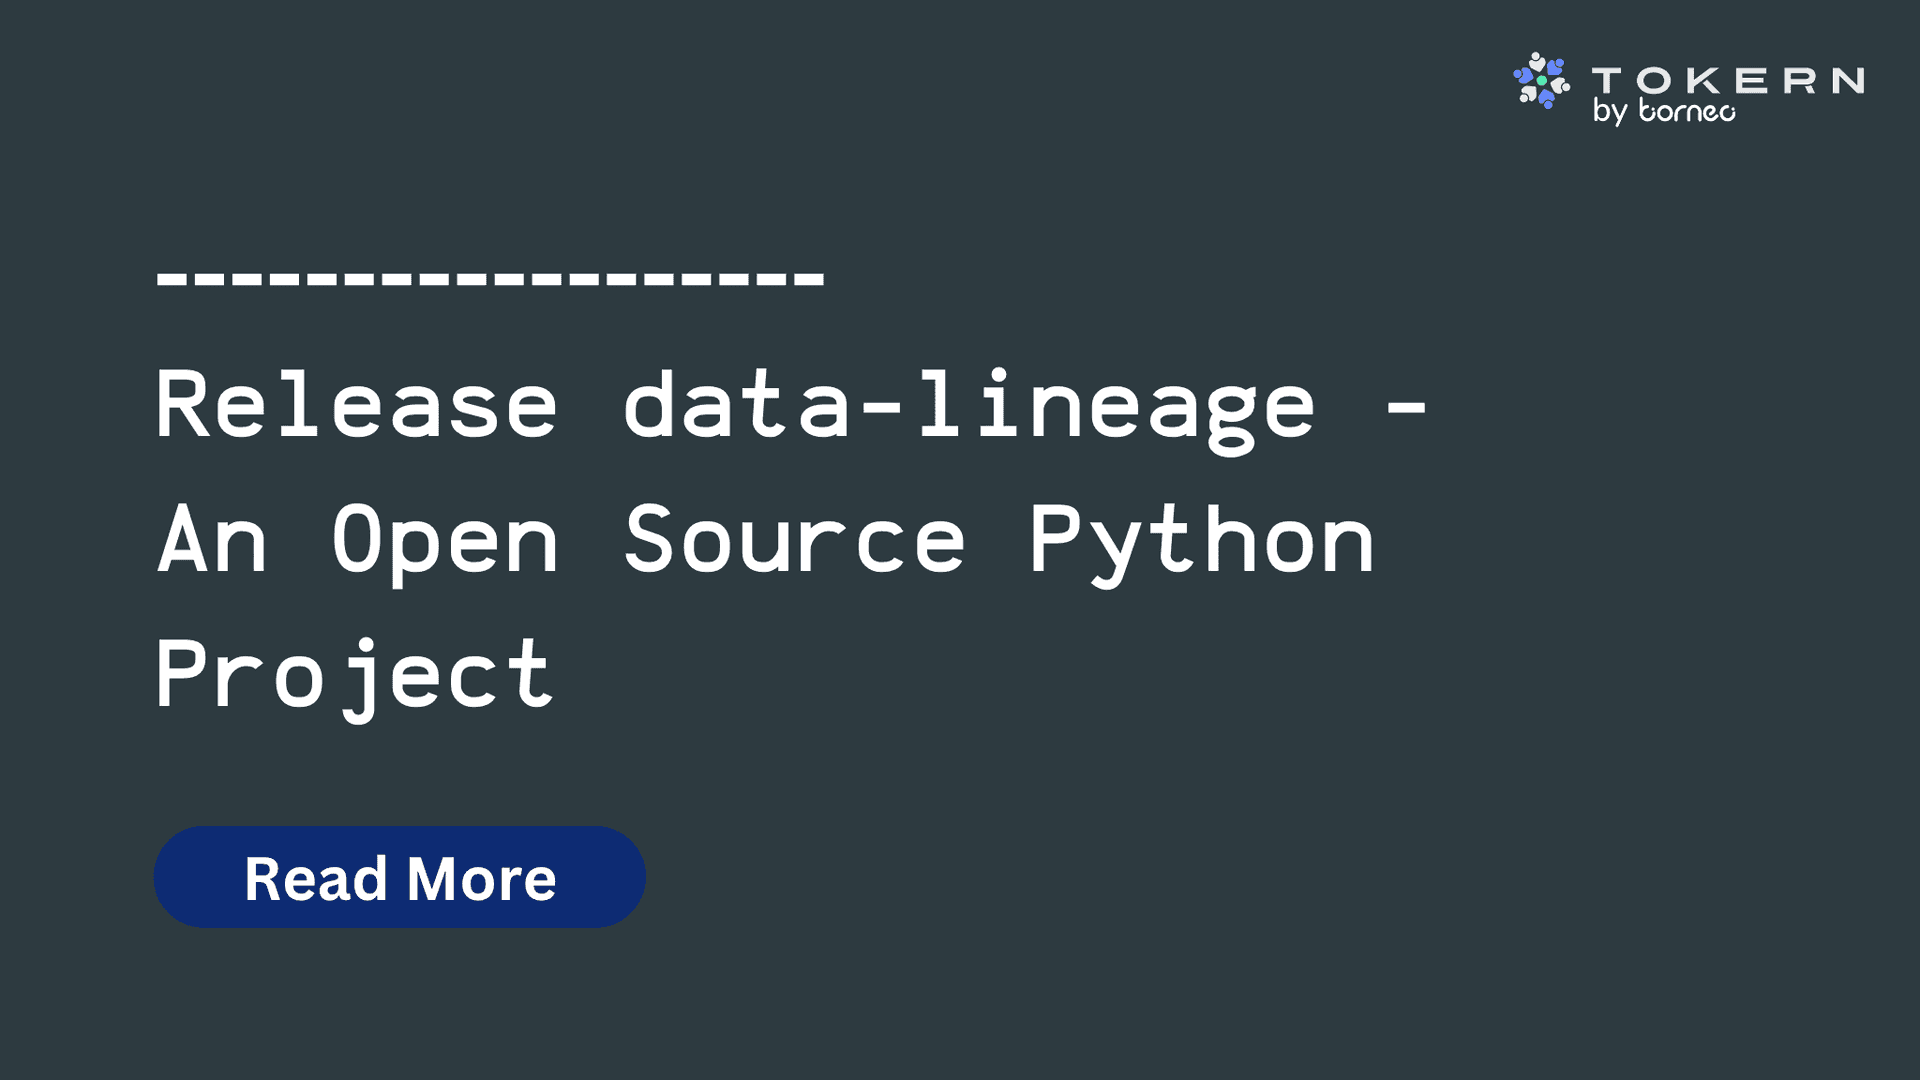 Release_data_lineage_An_Open_Source_Python_Project_081314c67f.png